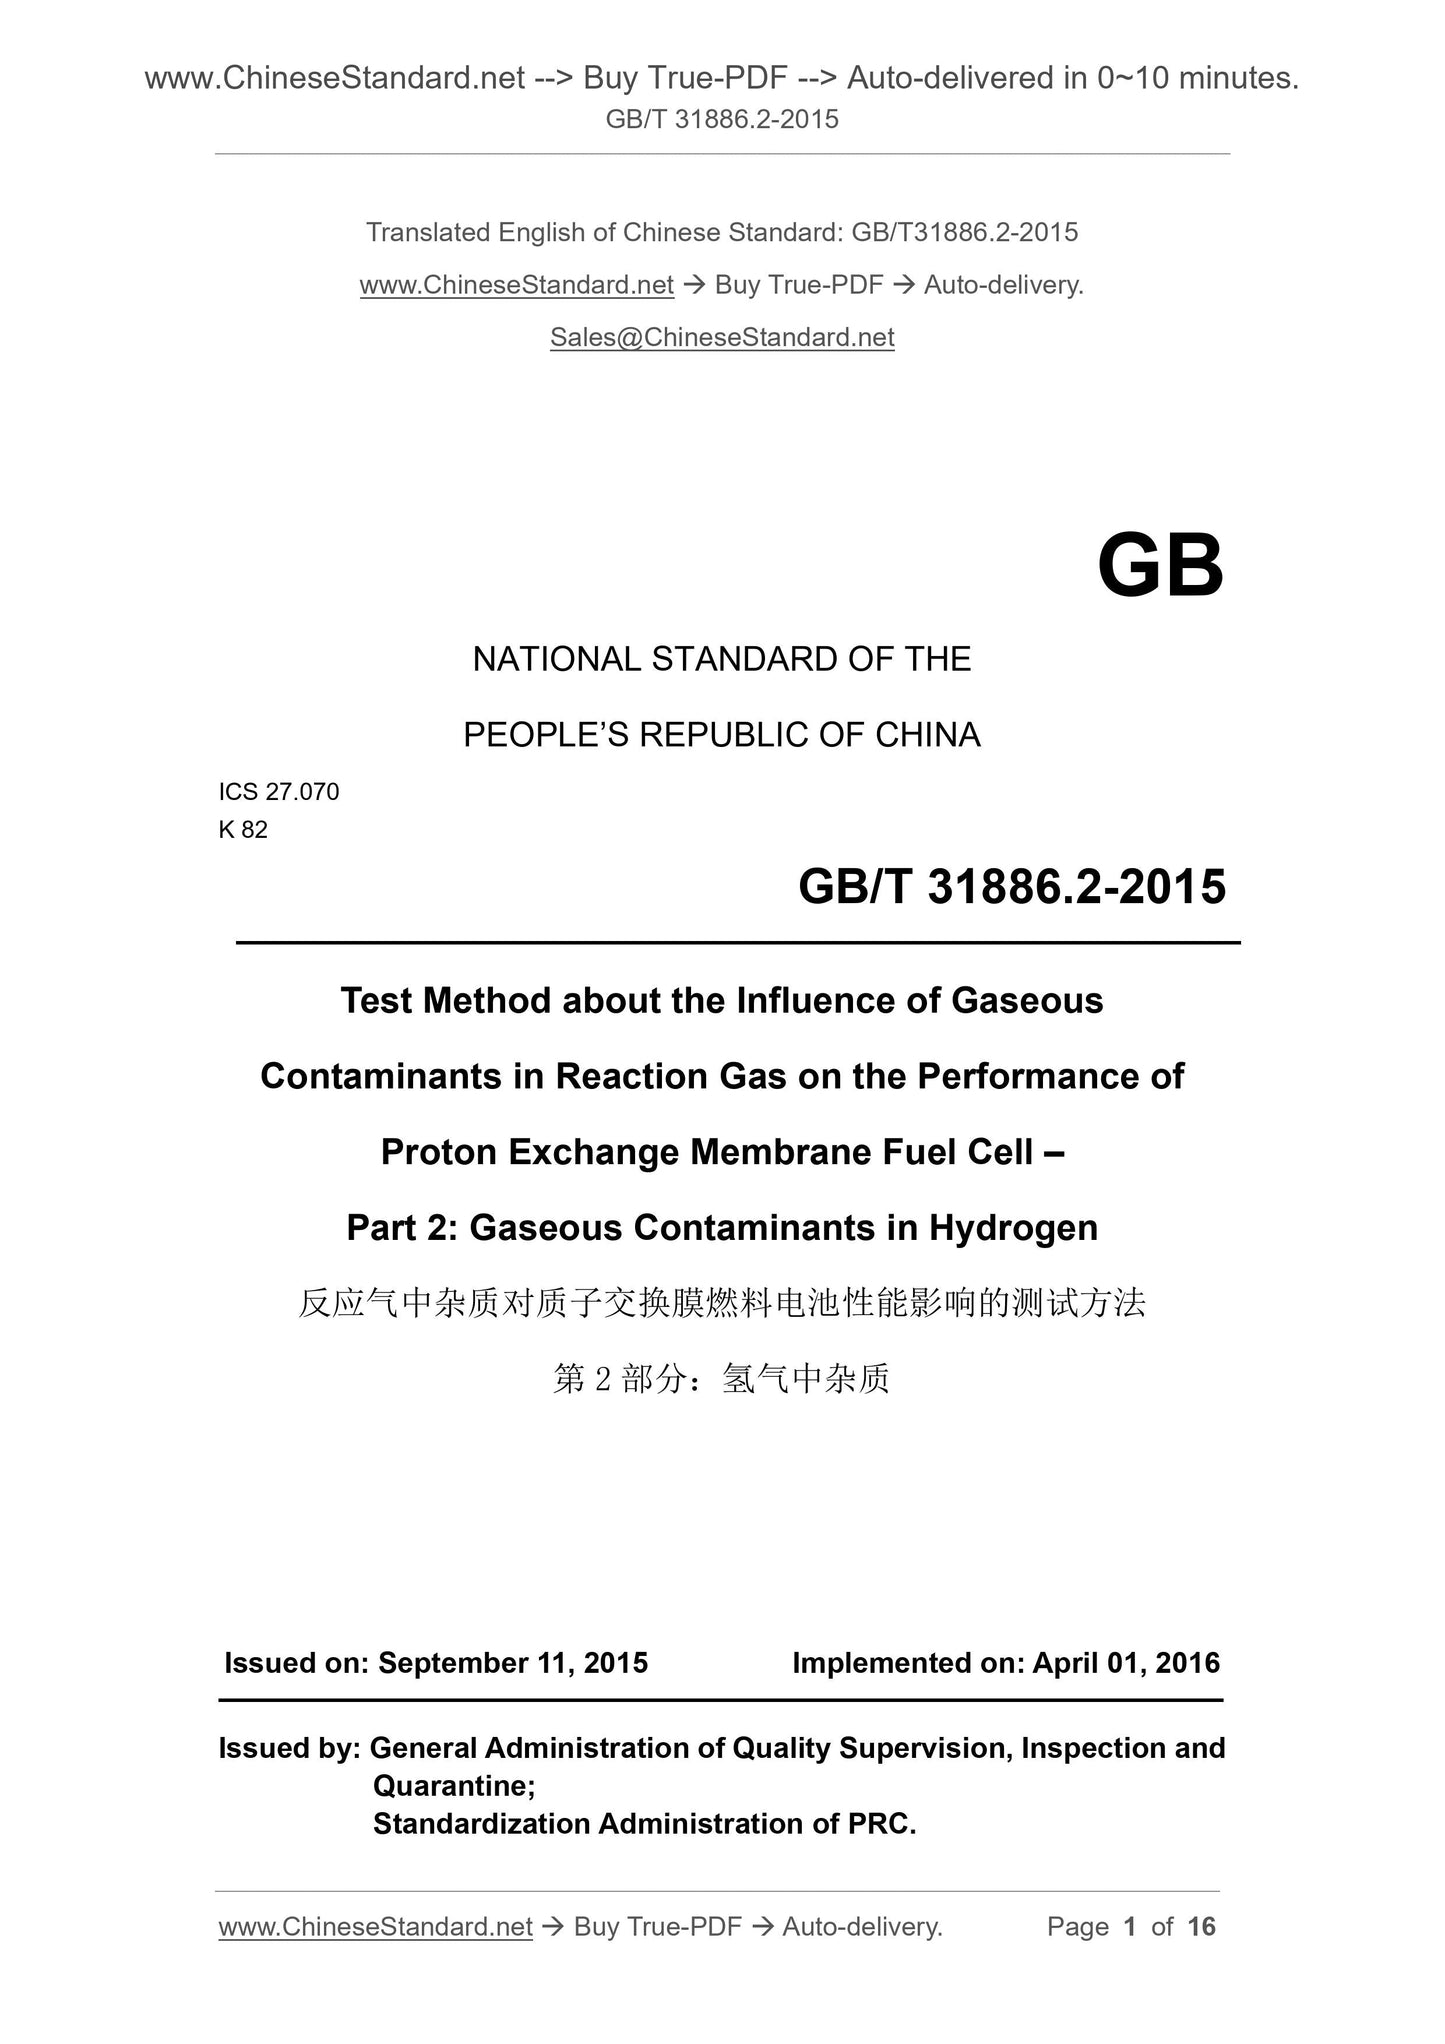 GB/T 31886.2-2015 Page 1